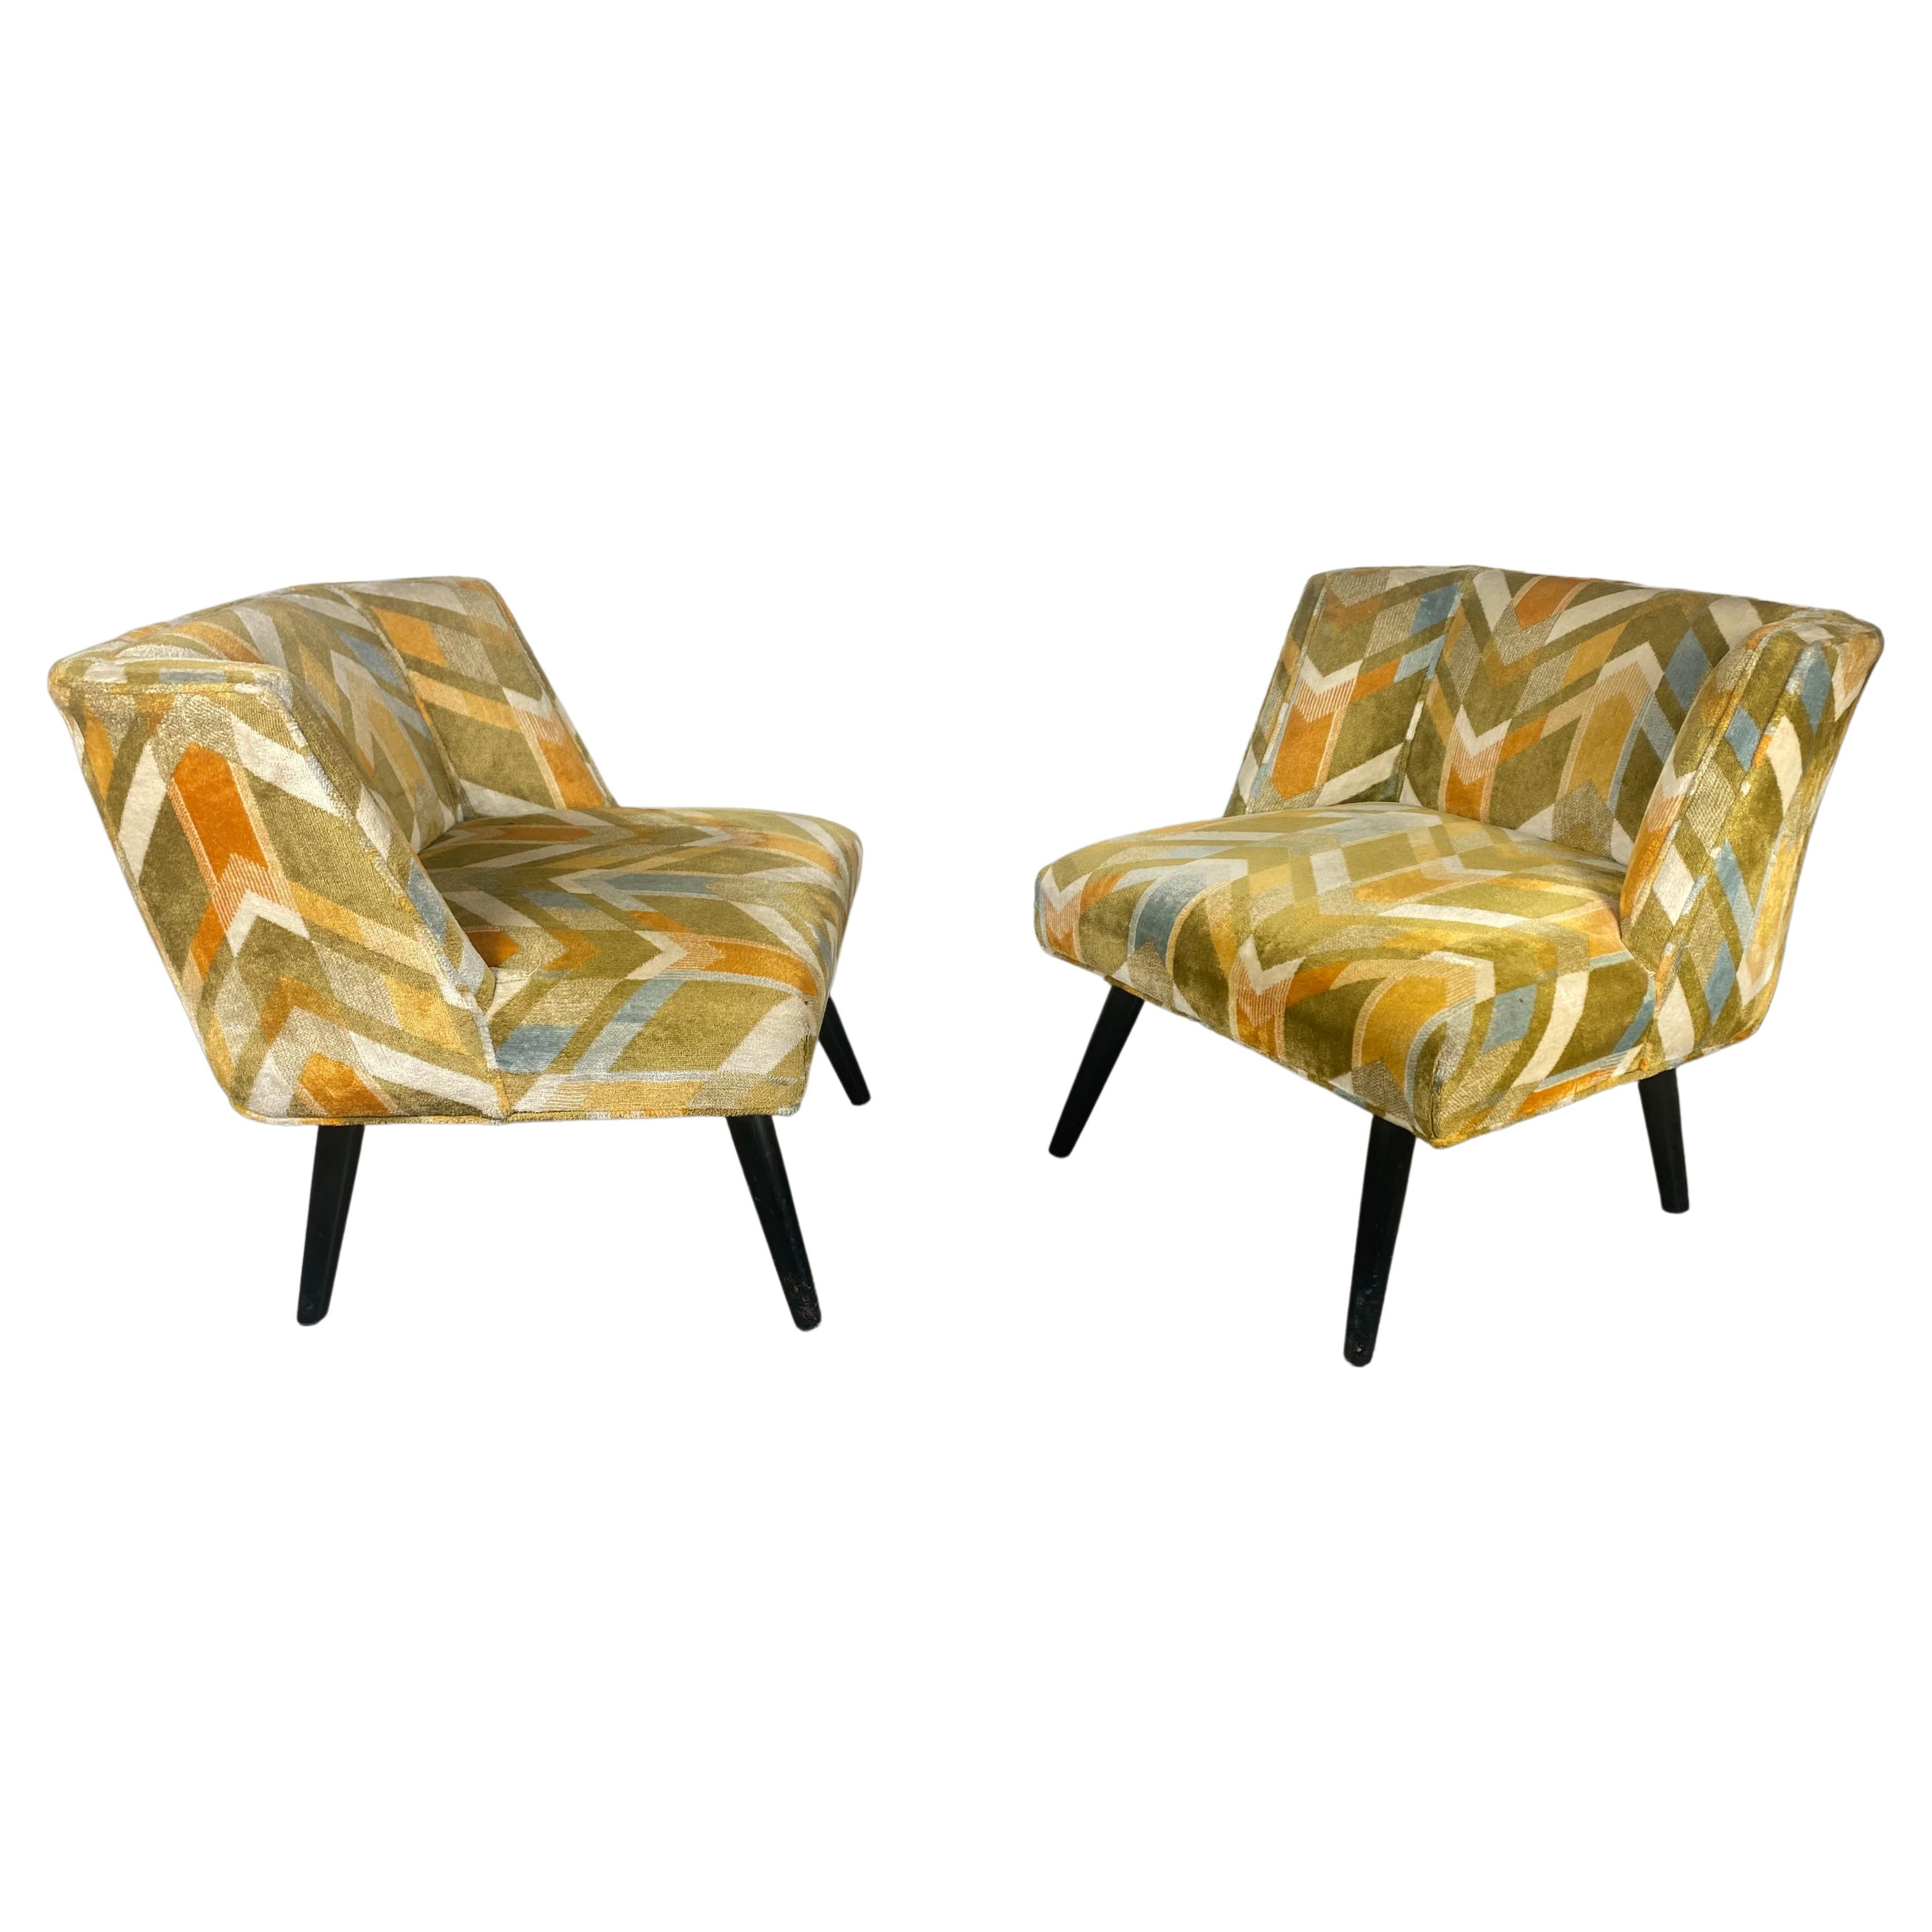 Pair Modernist Lounge Chairs, California Modern Manner of James Mont